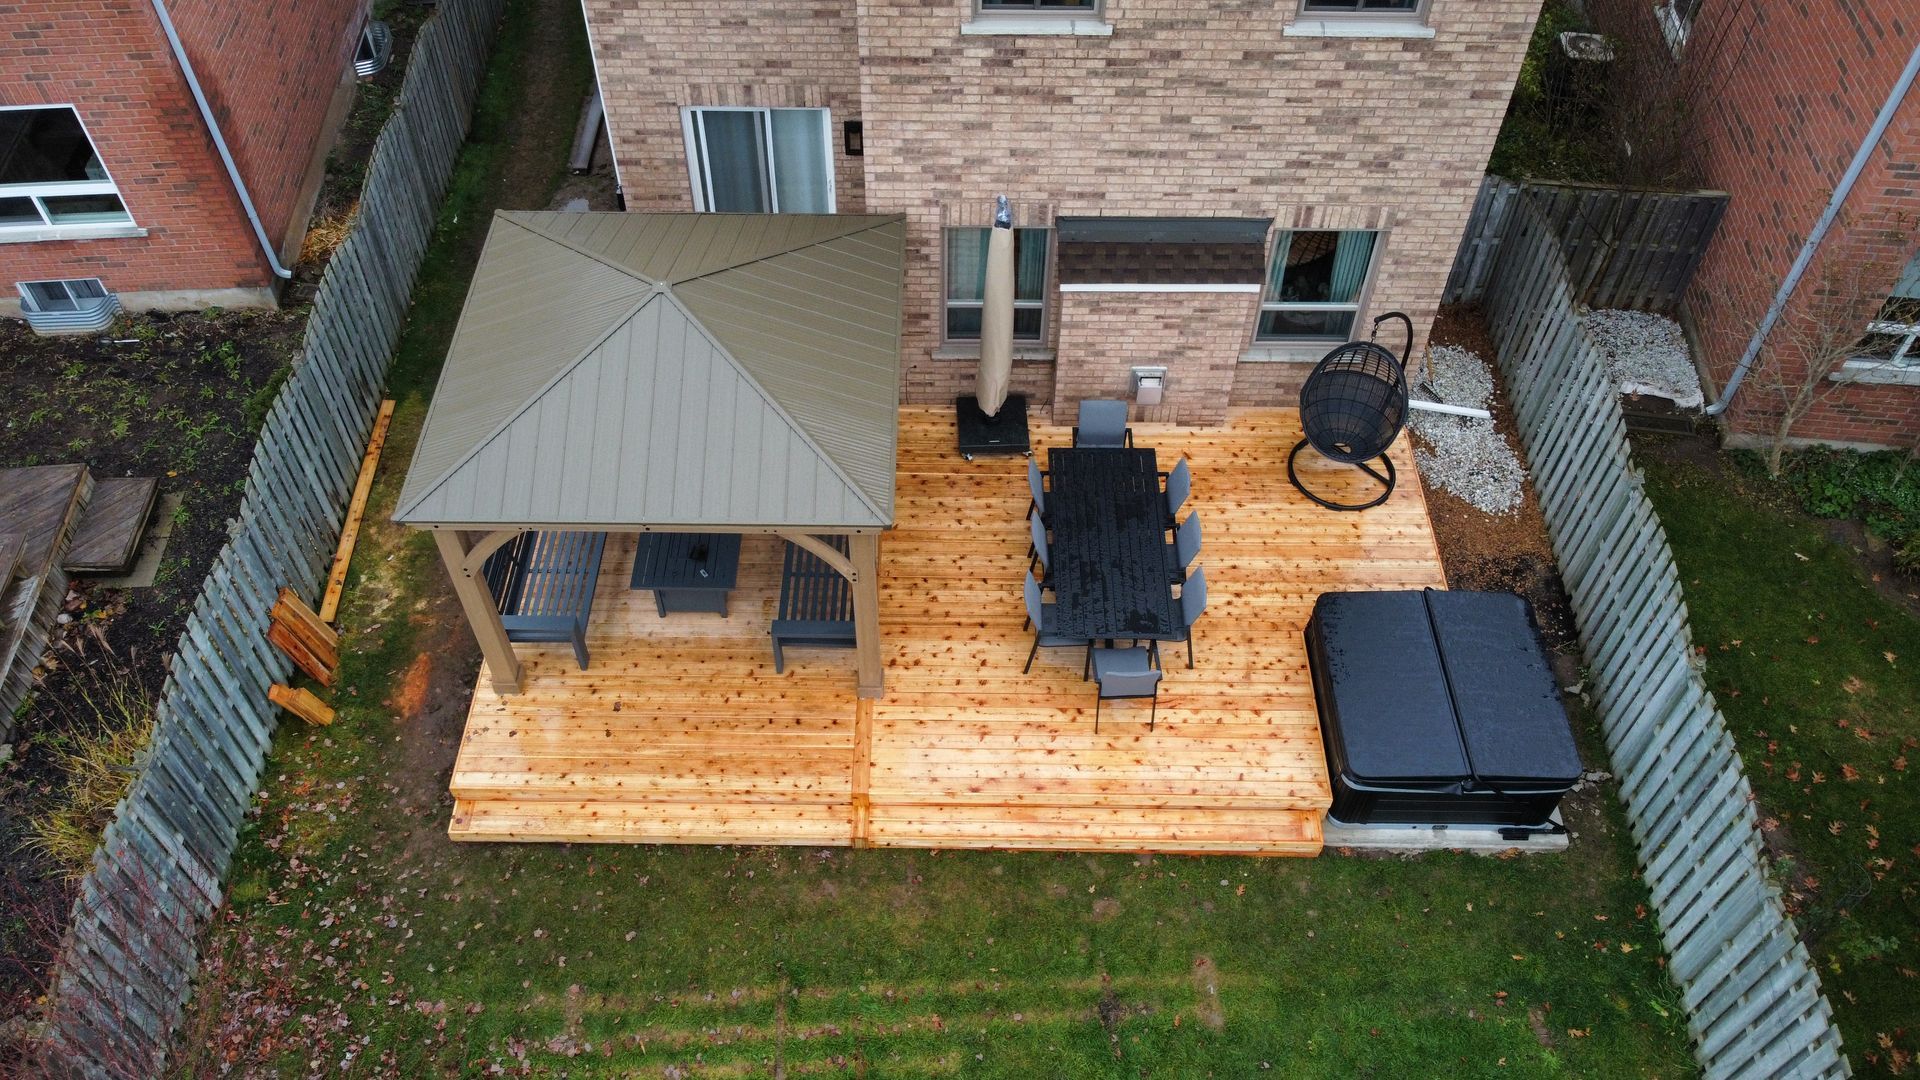 An aerial view of a wooden deck with a gazebo and a hot tub.